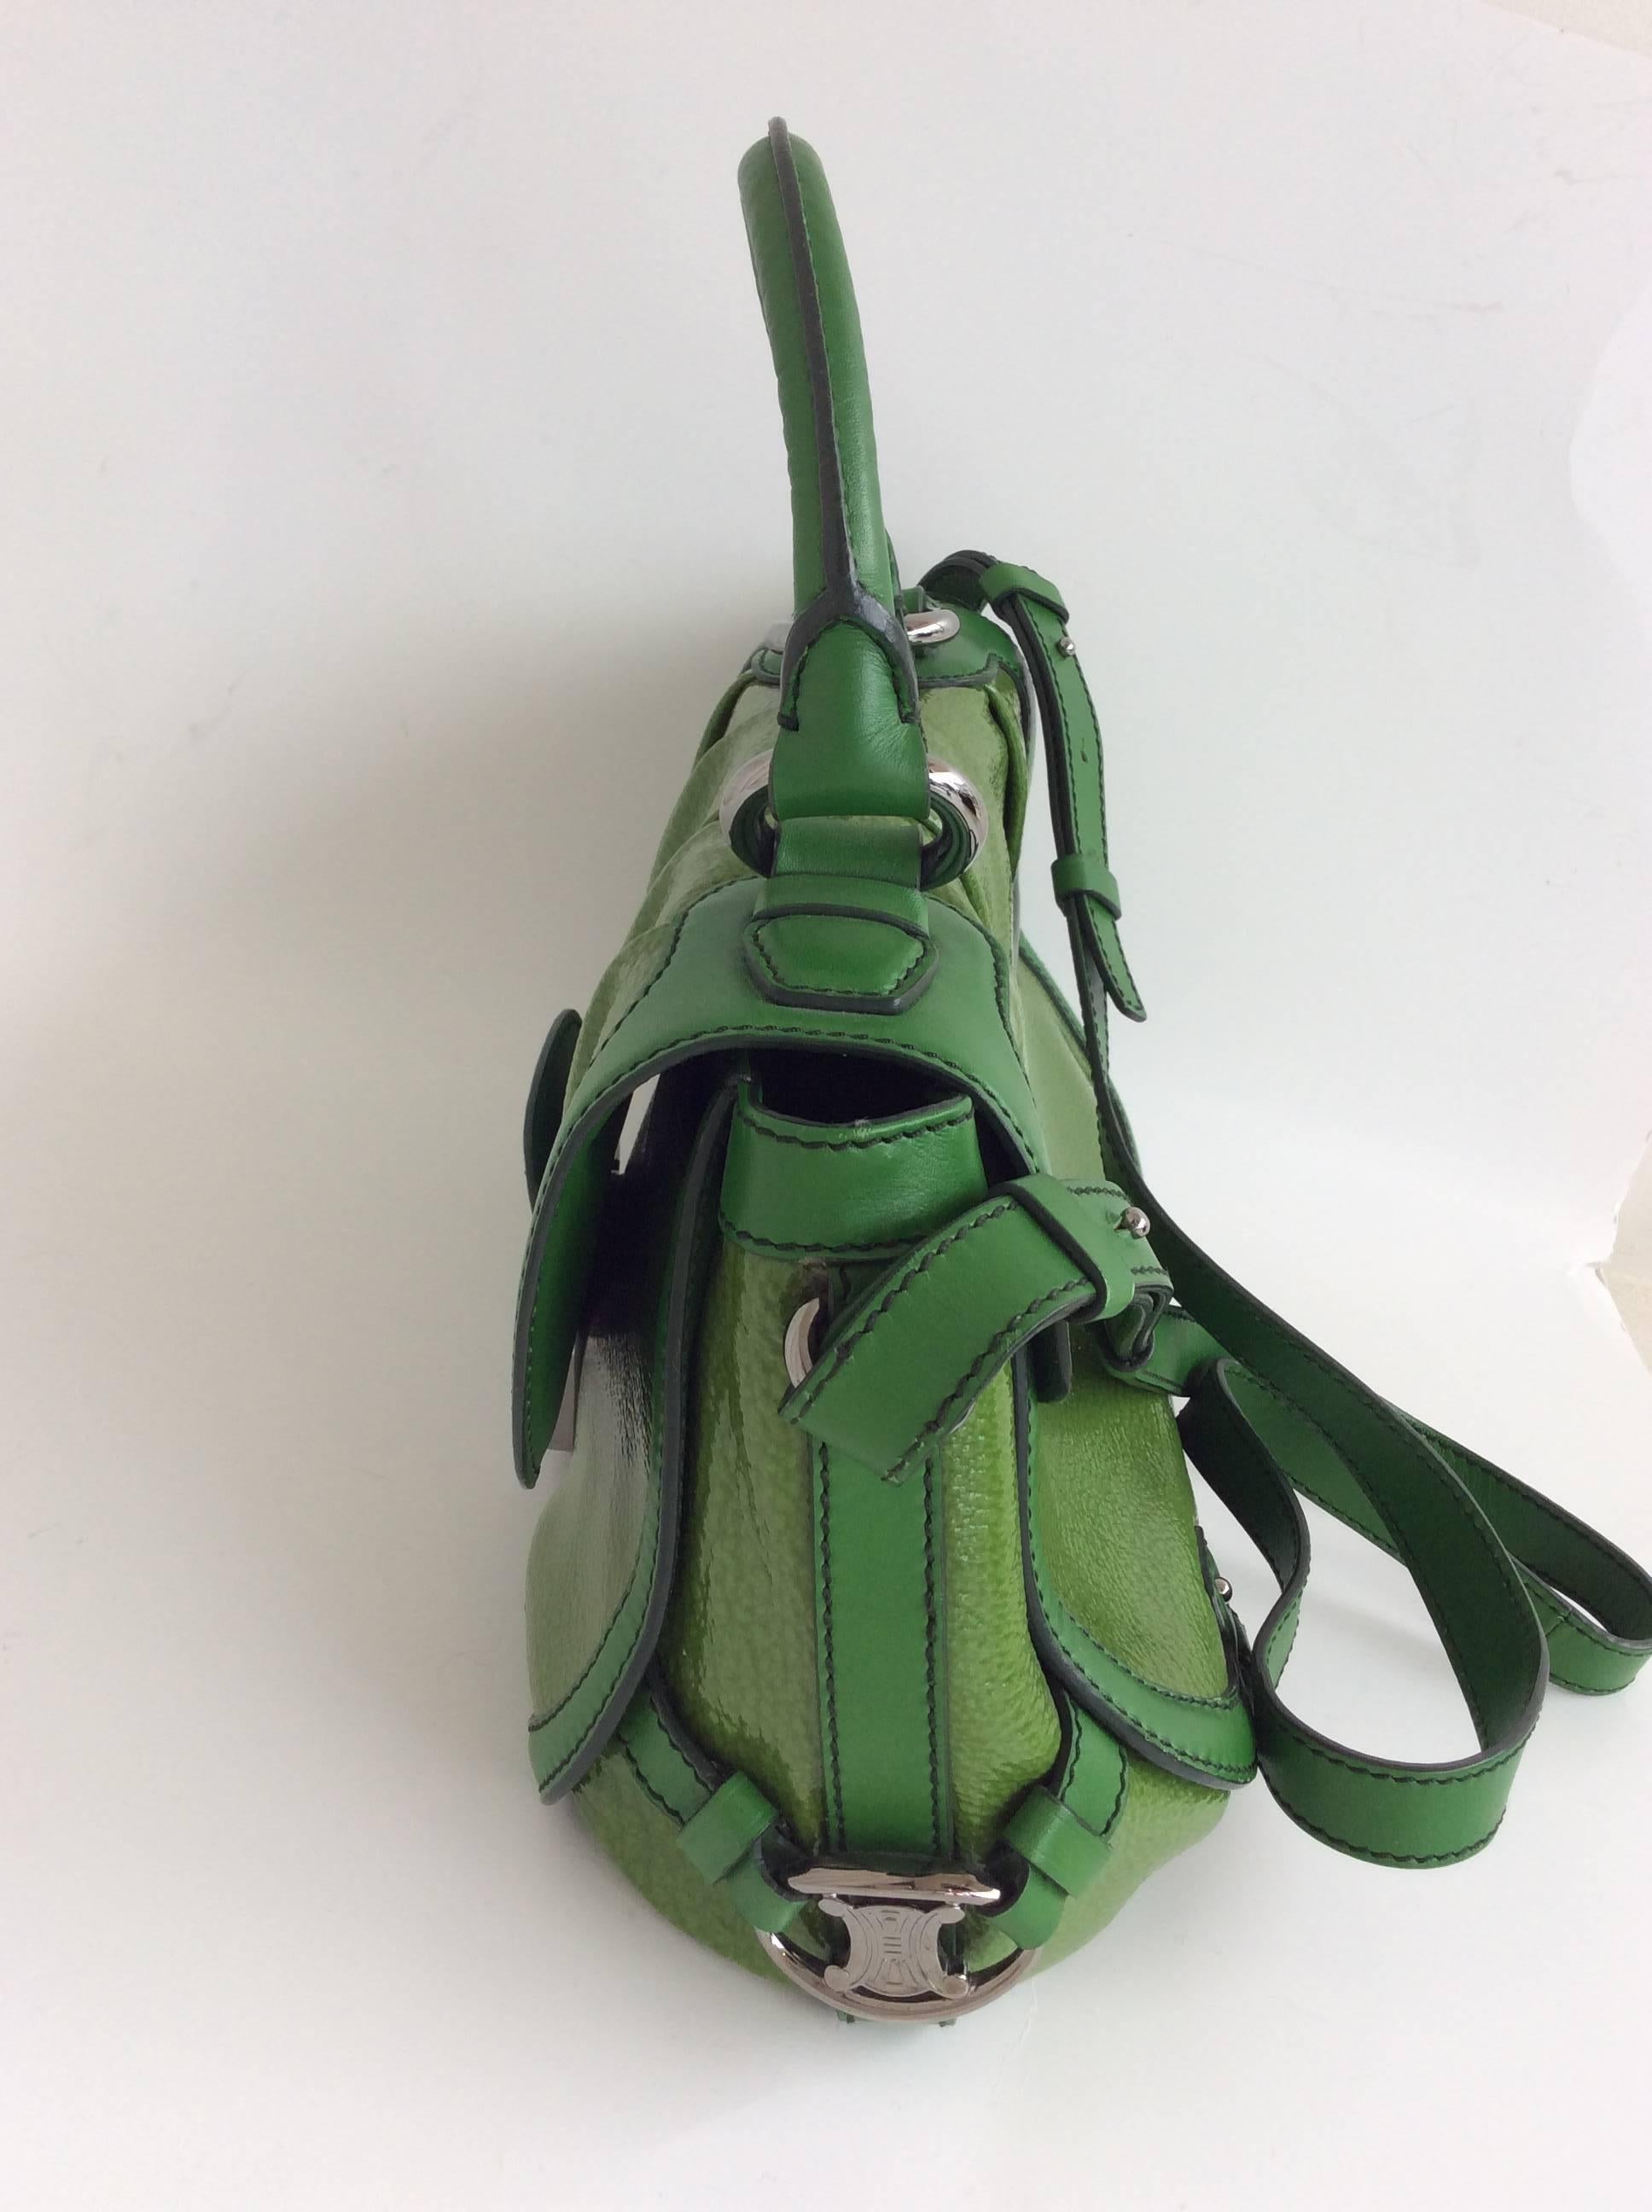 Celine Green Patent Leather Satchel with Shoulder Strap with Silver Hardware In Excellent Condition For Sale In San Francisco, CA